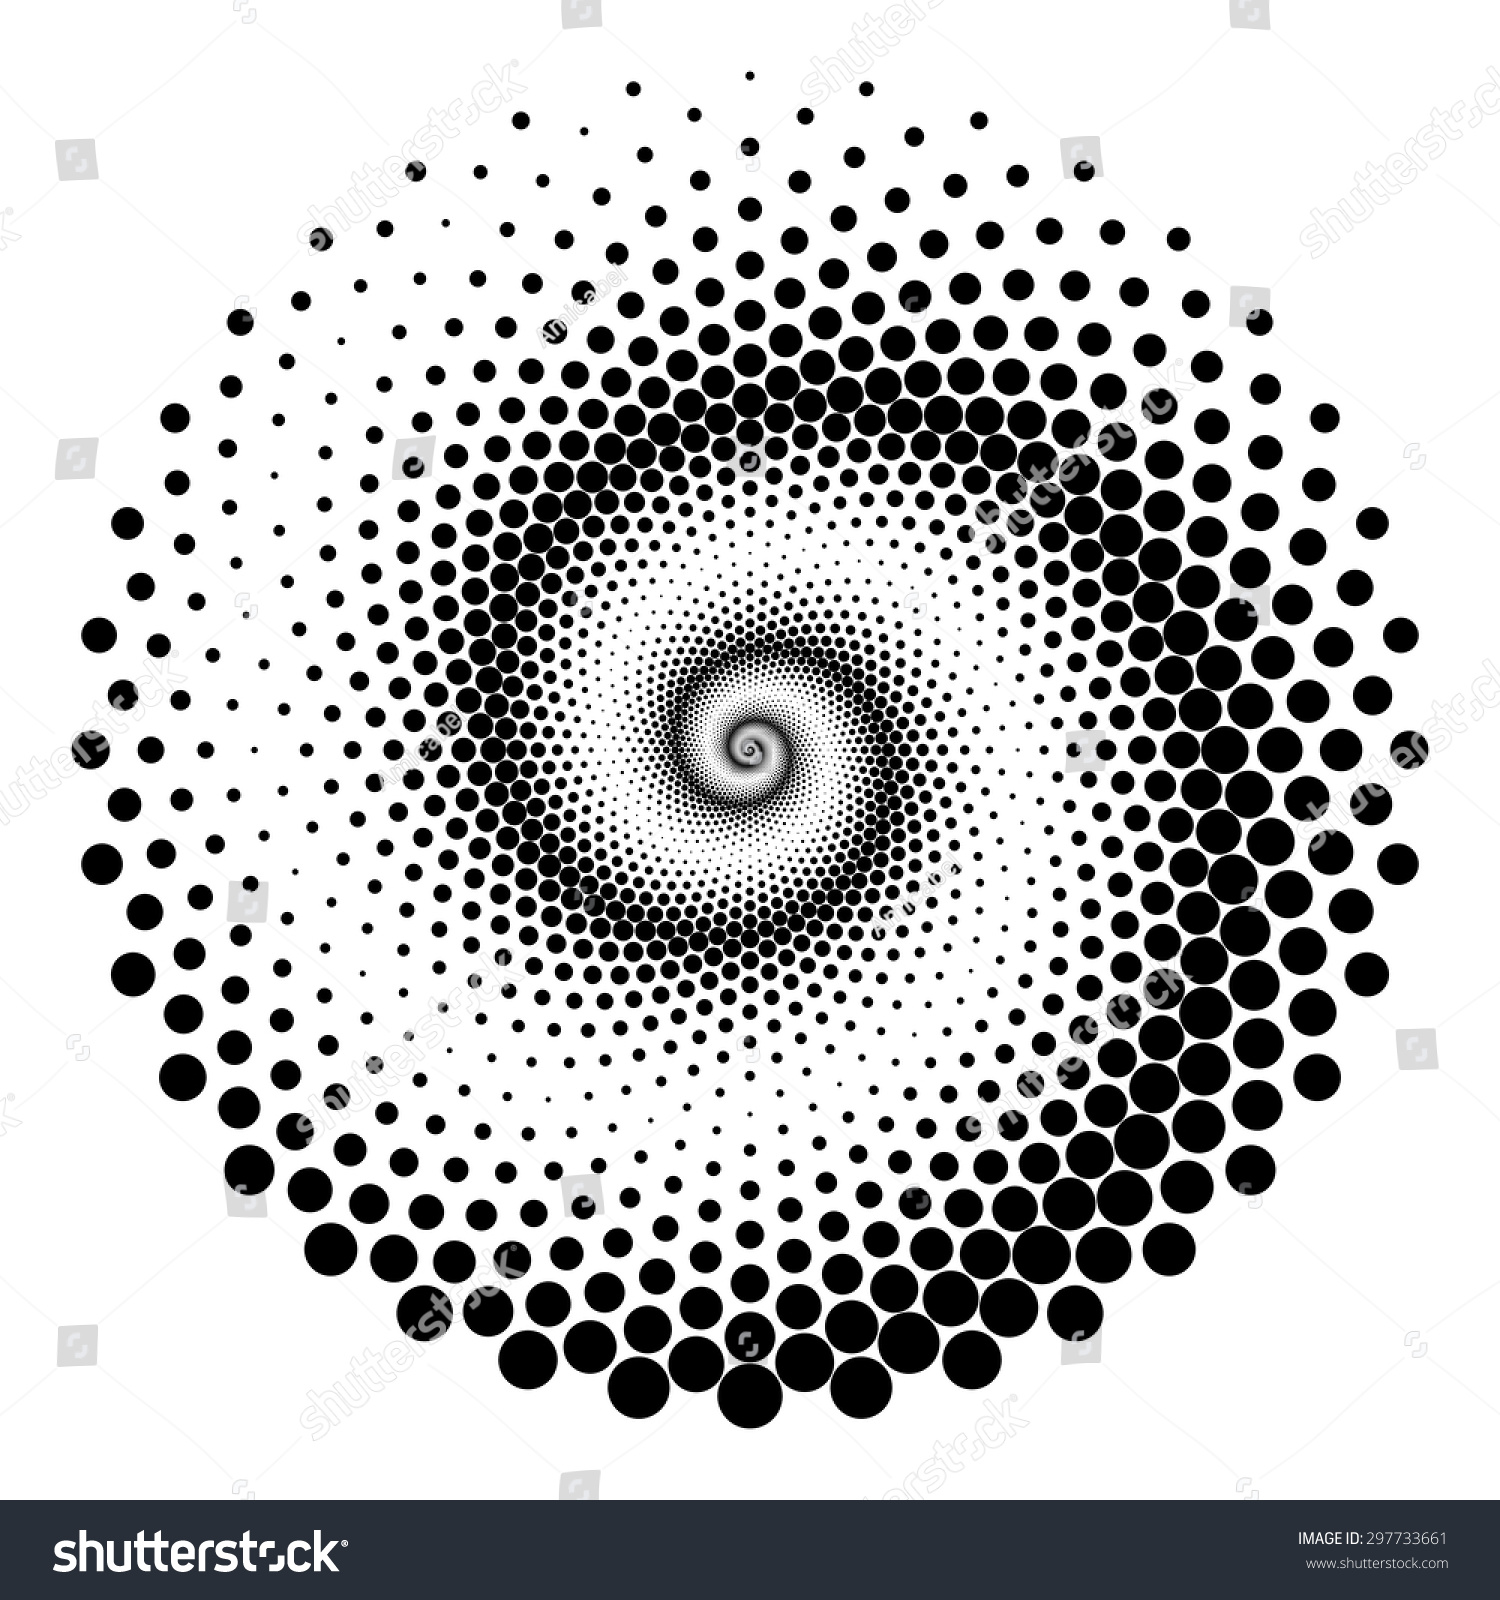 Design Spiral Dots Backdrop Abstract Monochrome